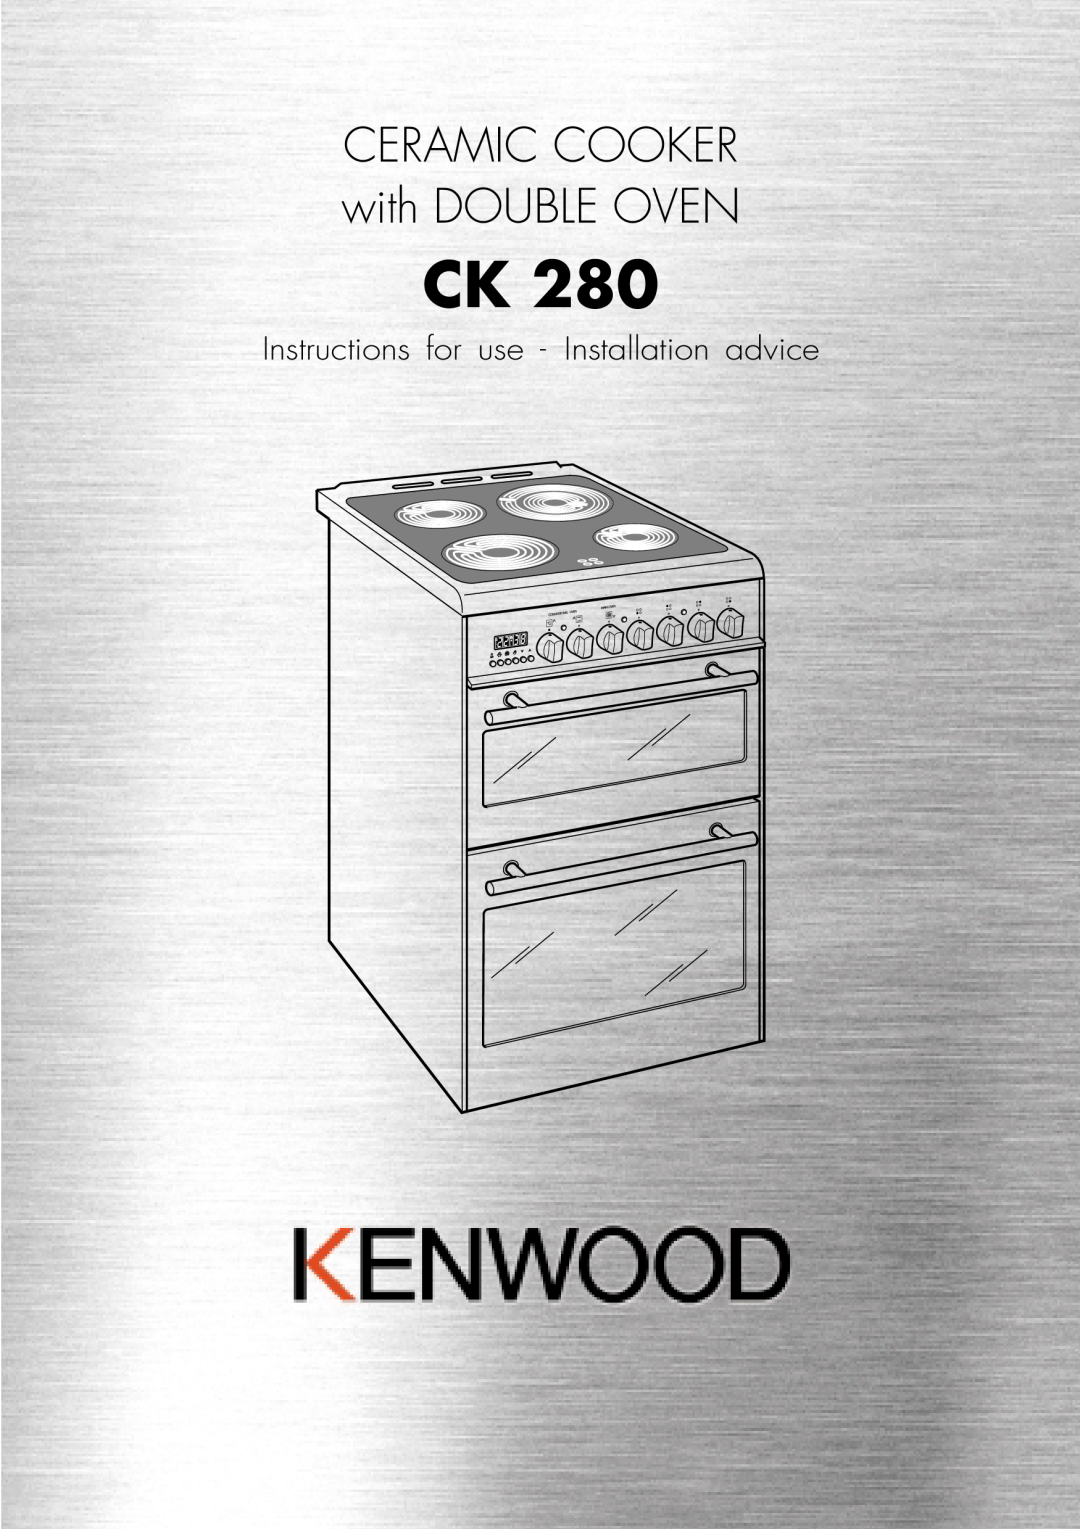 Kenwood CK 280 manual CERAMIC COOKER with DOUBLE OVEN, Instructions for use - Installation advice 